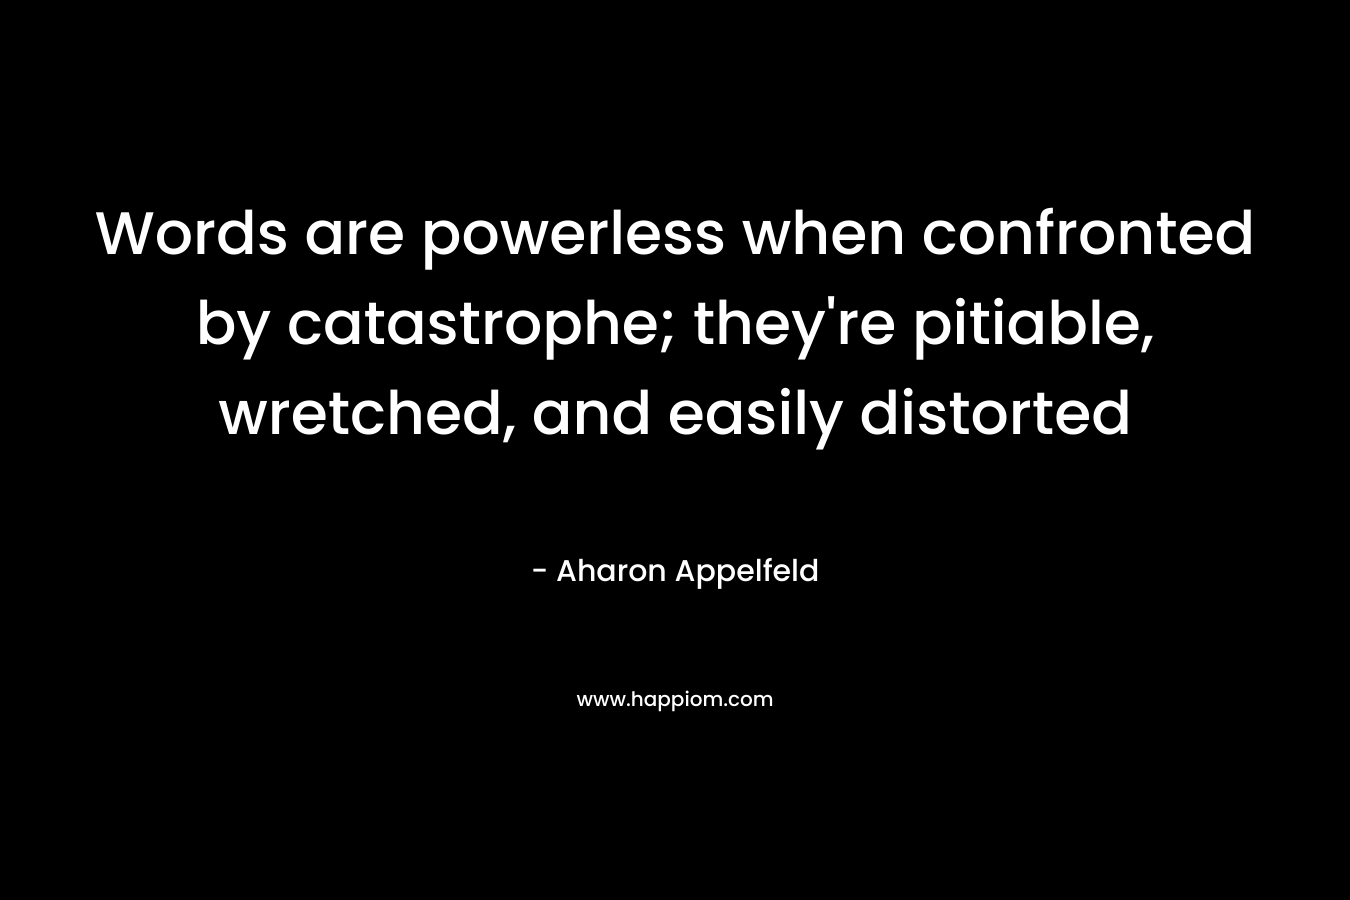 Words are powerless when confronted by catastrophe; they're pitiable, wretched, and easily distorted